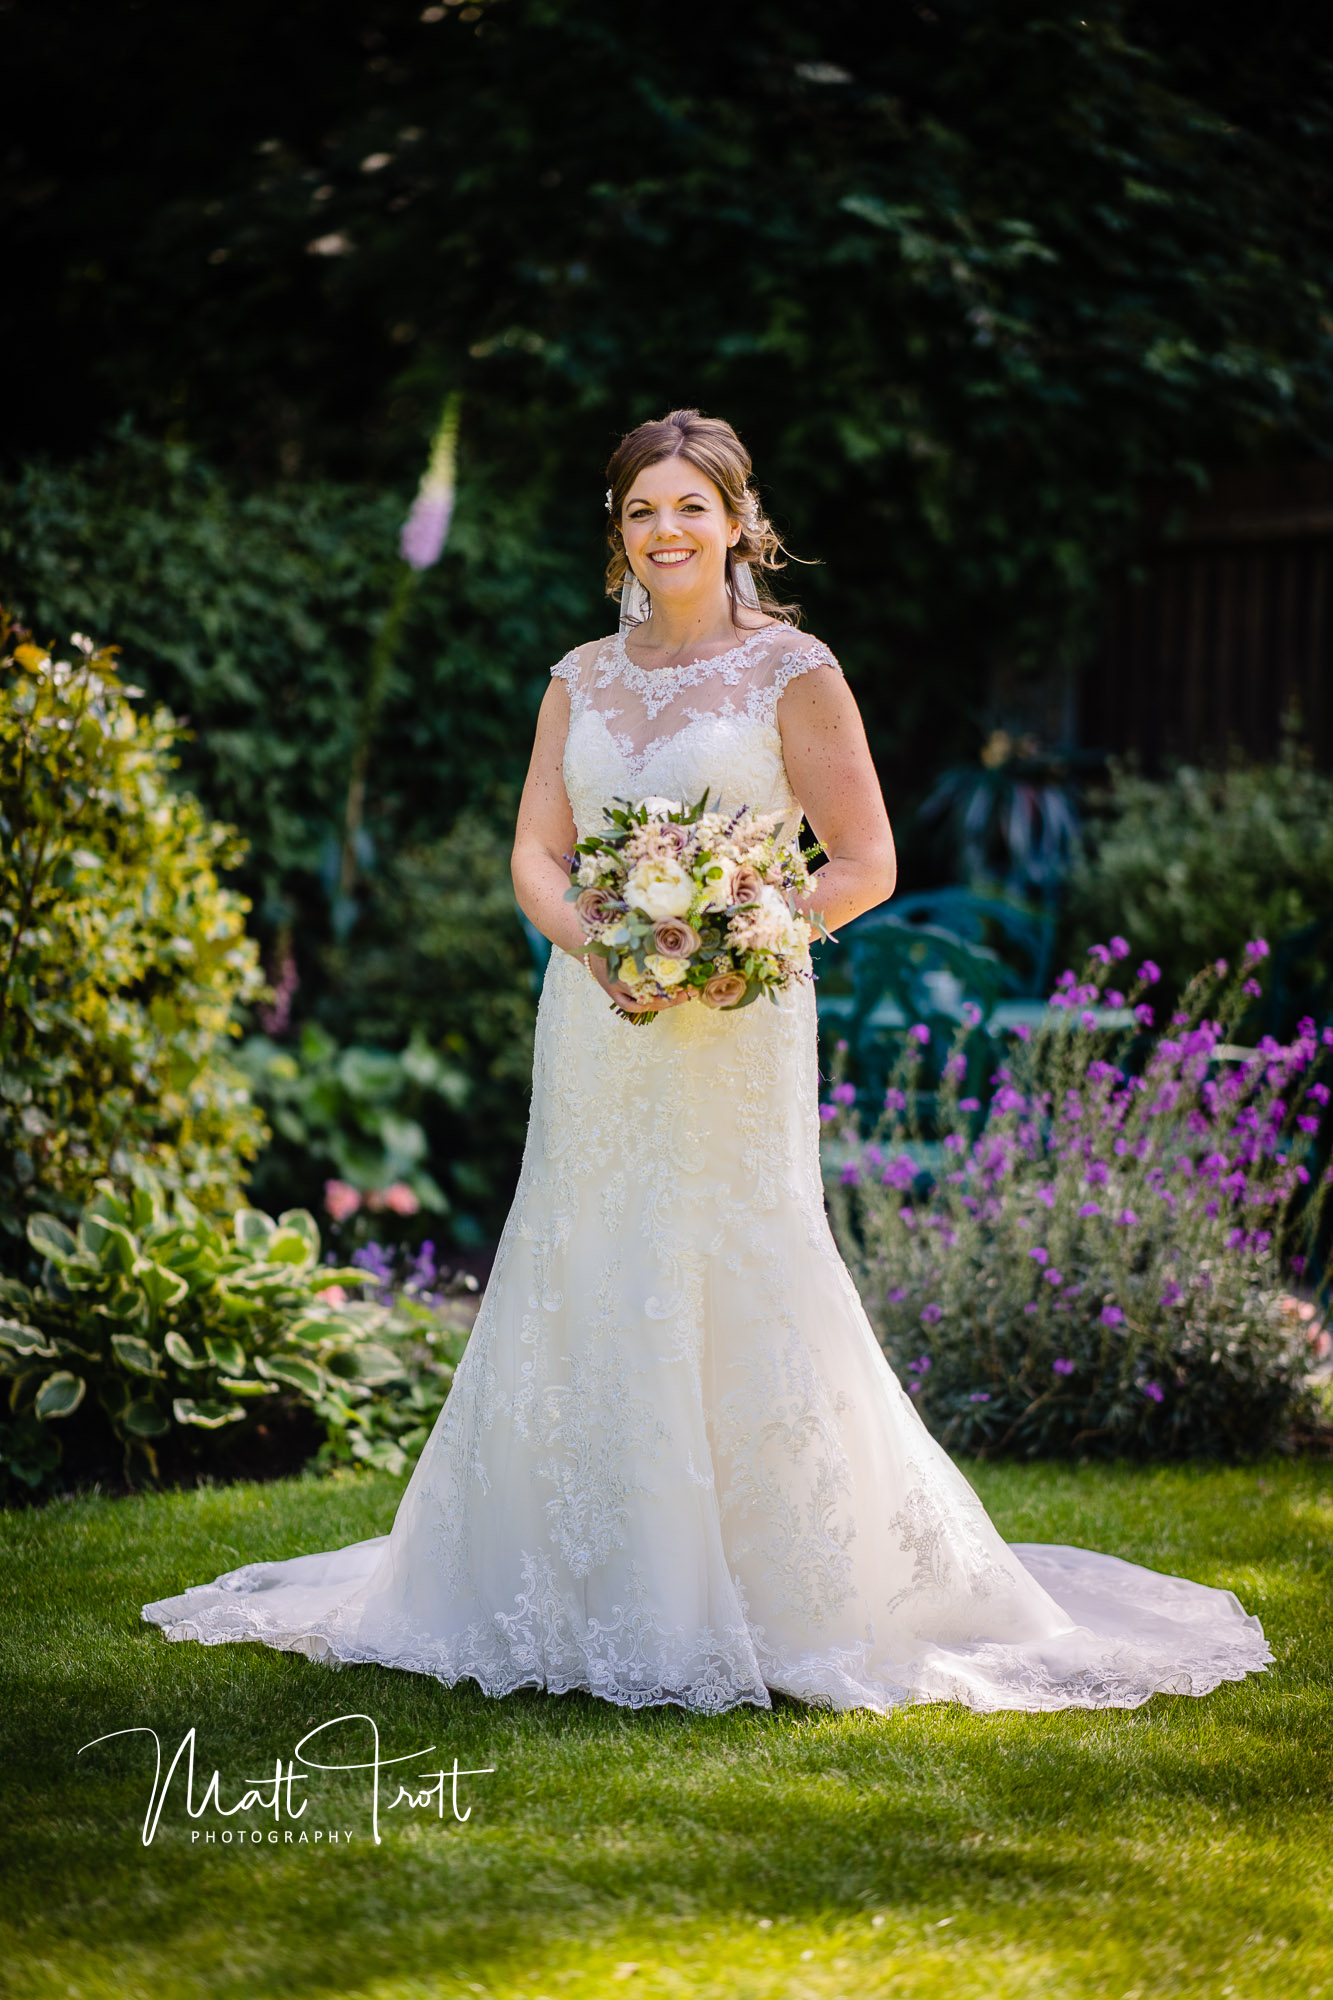 Bridal portrait in the garden with bride smiling and holding flowers